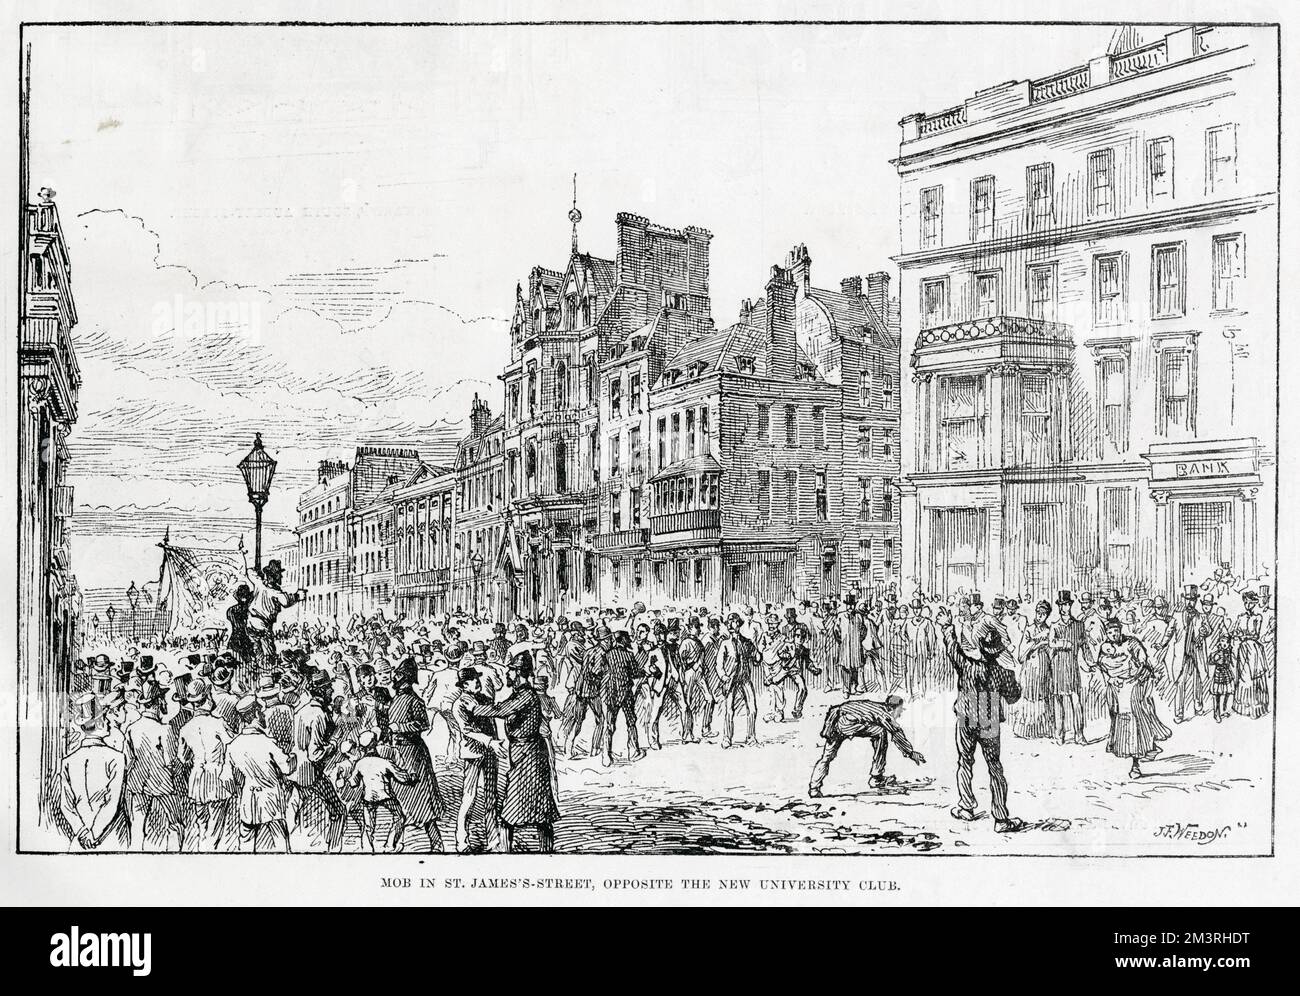 A mob in St James' Street, opposite the new university club. Following at an open air meeting of unemployed East End dock workers and artisans in Trafalgar Square, the people were stirred to violence following incendiary speeches, and rioted, causing havoc in the fashionable streets of the West End. Stock Photo